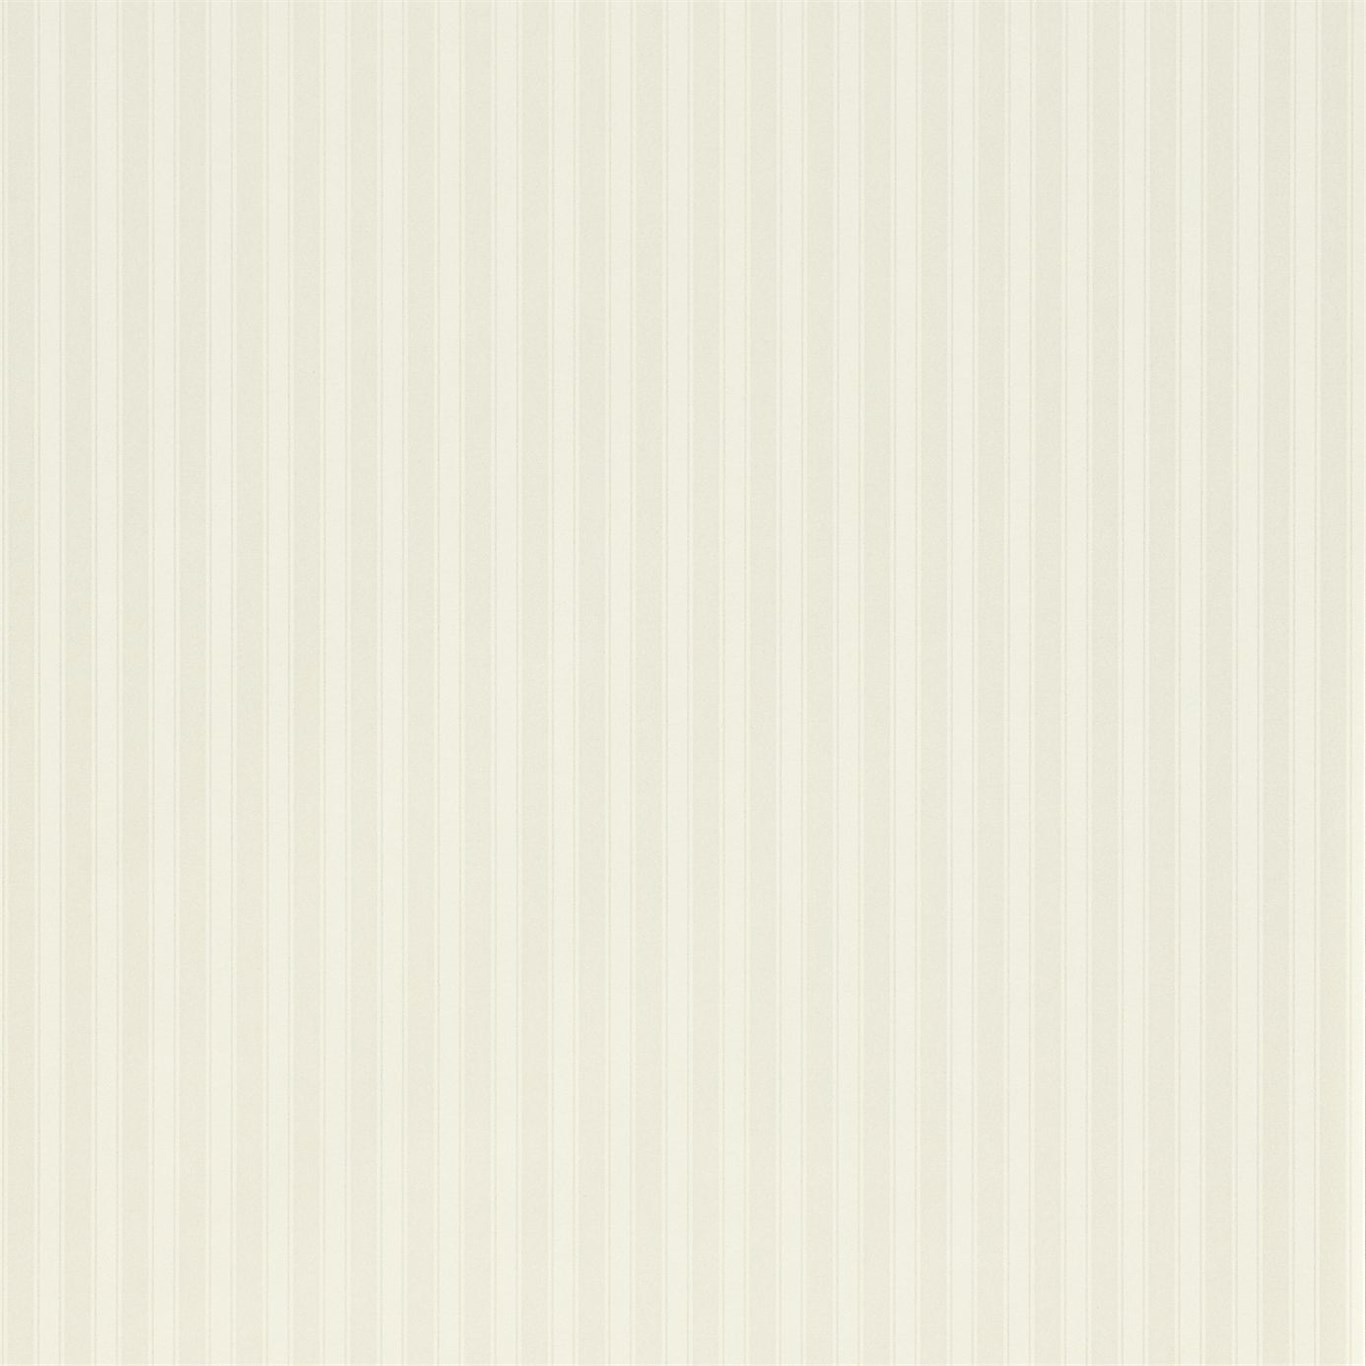 New Tiger Stripe Shell/Ivory Wallpaper by SAN